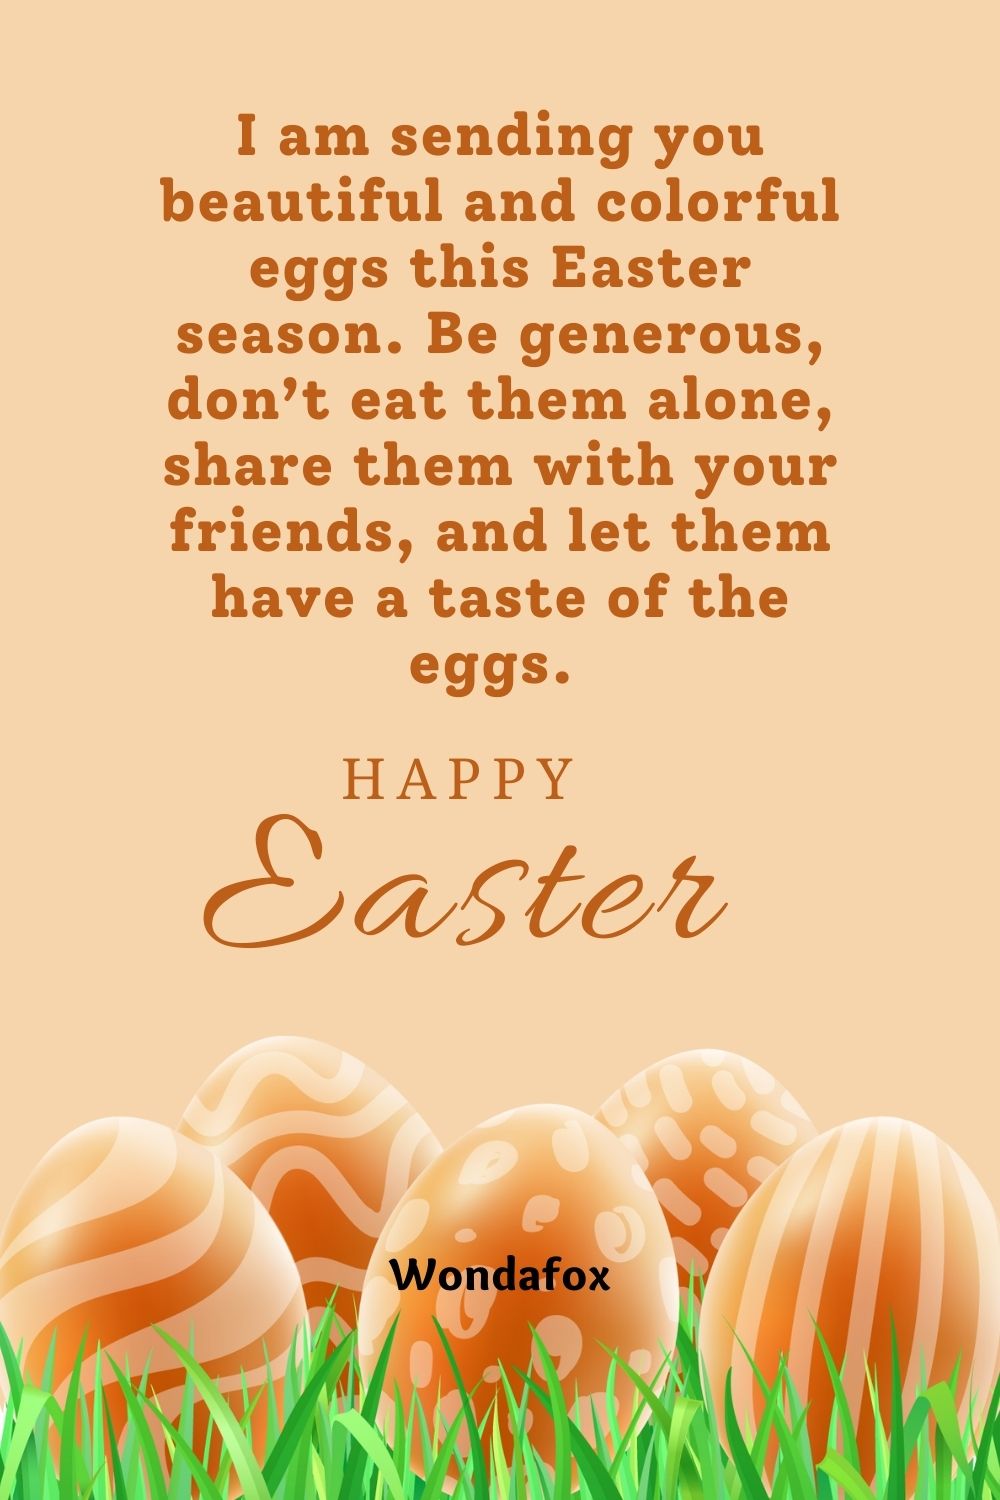 I am sending you beautiful and colorful eggs this Easter season. Be generous, don’t eat them alone, share them with your friends, and let them have a taste of the eggs. Happy Easter.